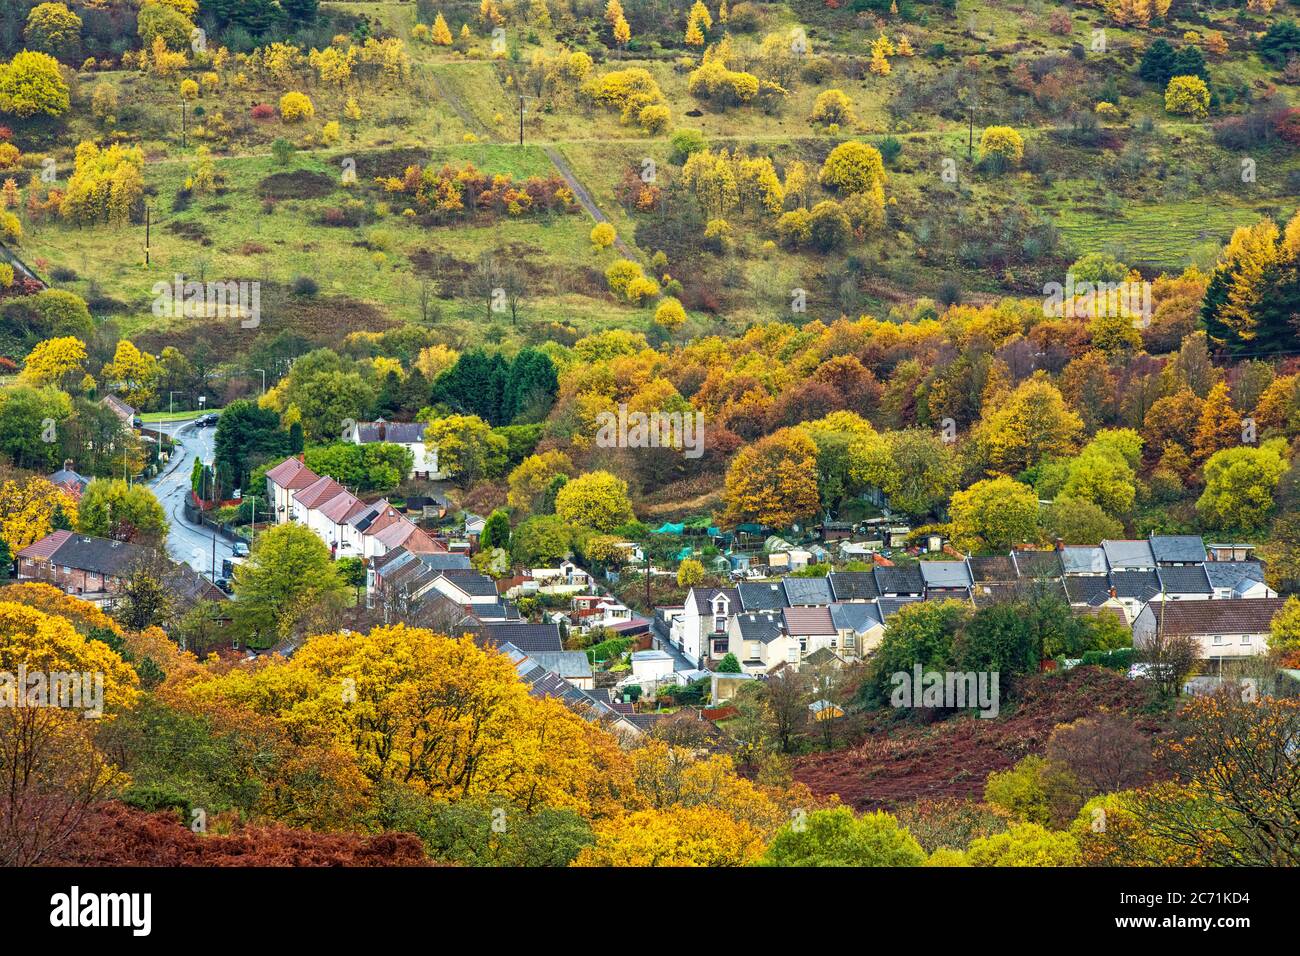 The Rhondda Valley town or village of Blaenrhondda in the Rhondda Fawr valley in early winter in November in South Wales.A Stock Photo